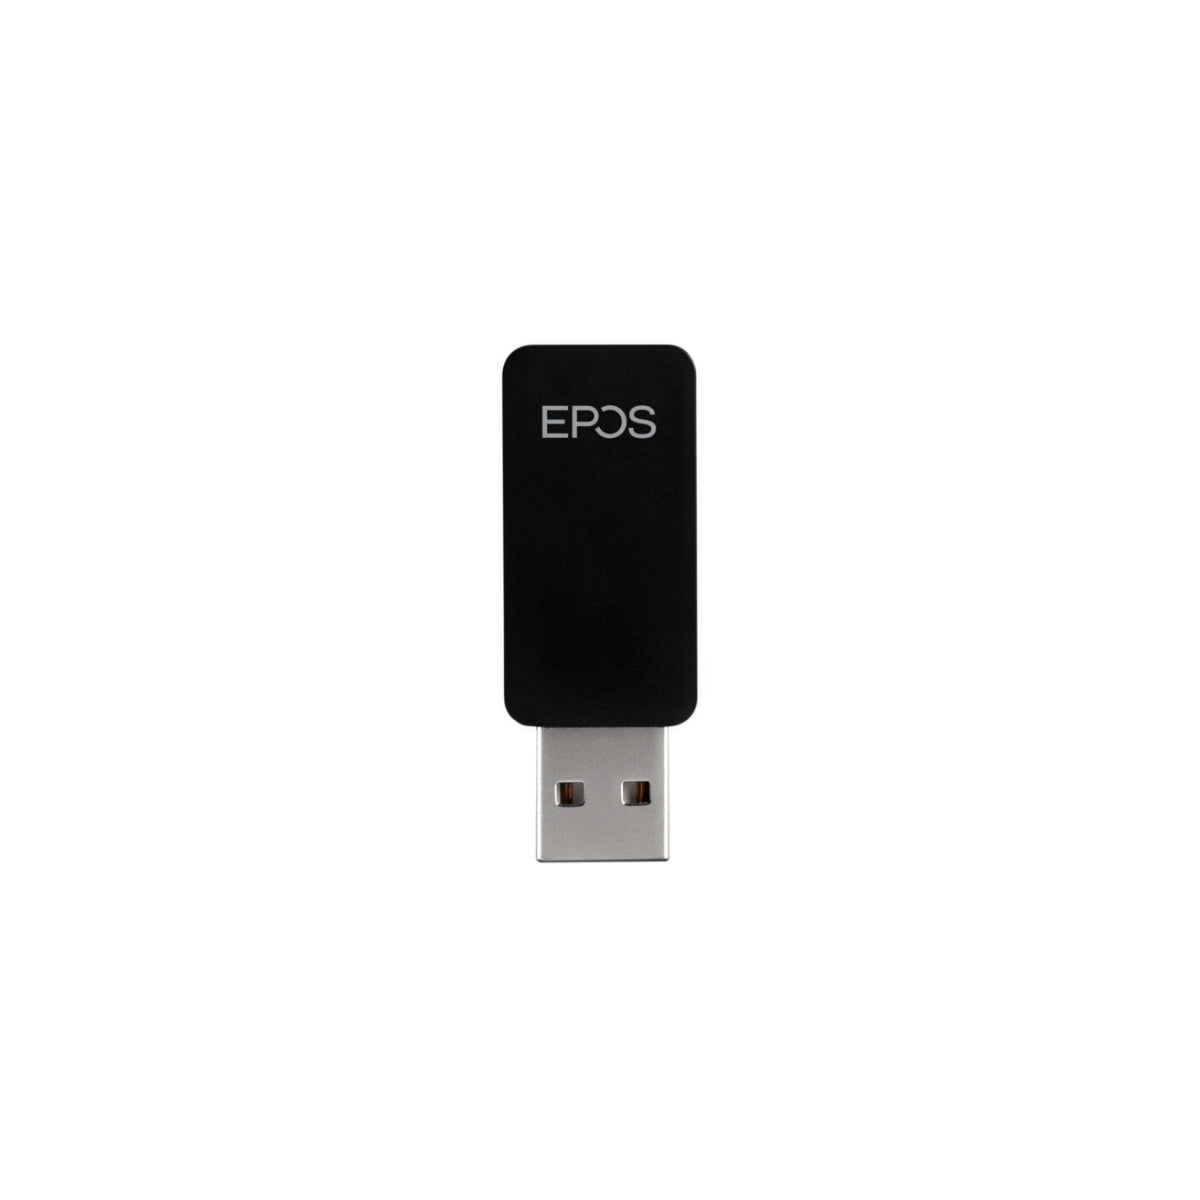 EPOS GSA 370 Dongle, Wireless USB Dongle for GSP 370